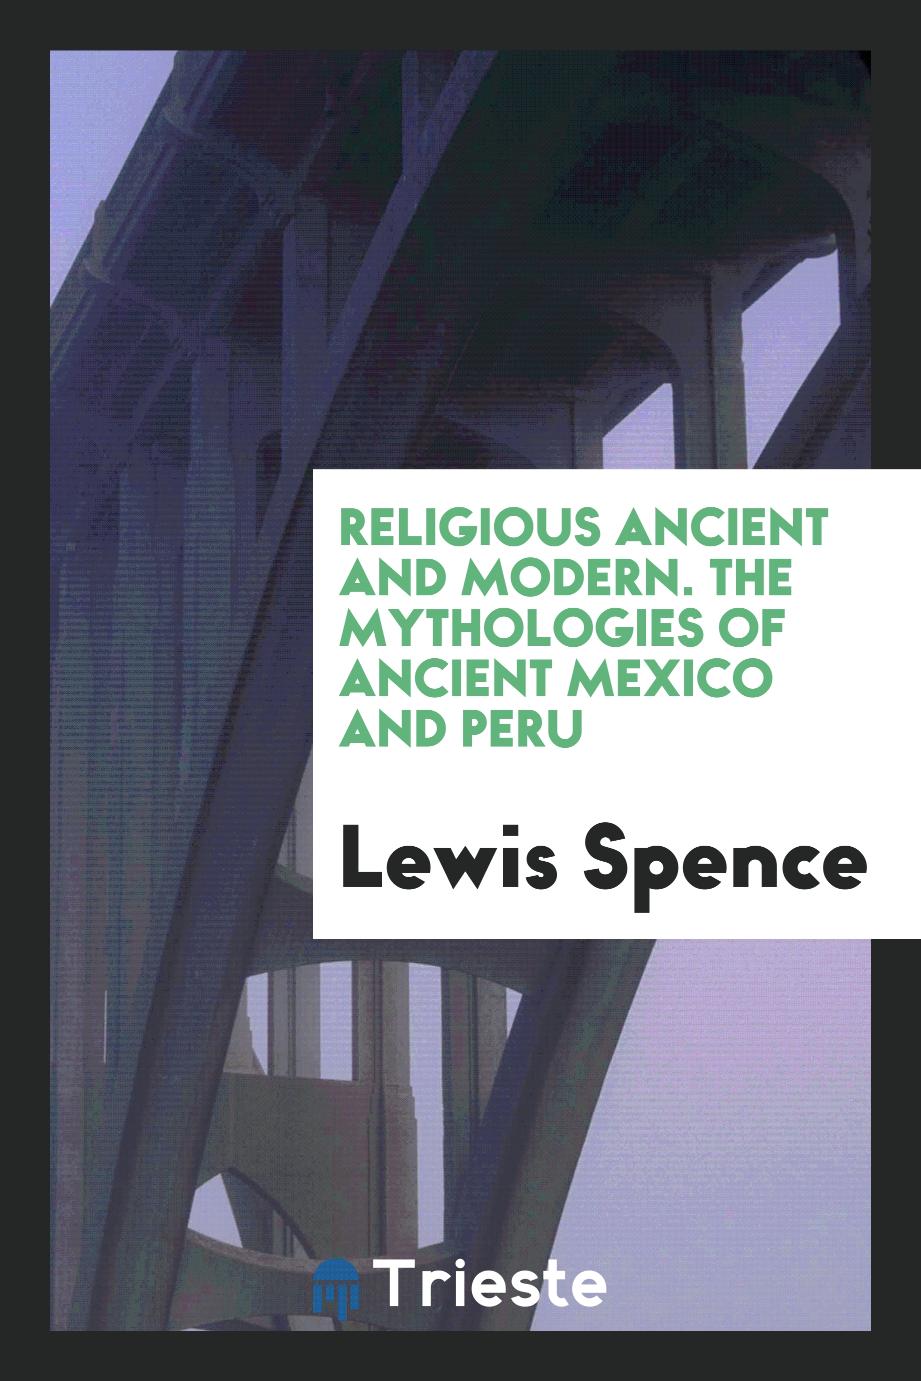 Religious Ancient and Modern. The Mythologies of Ancient Mexico and Peru